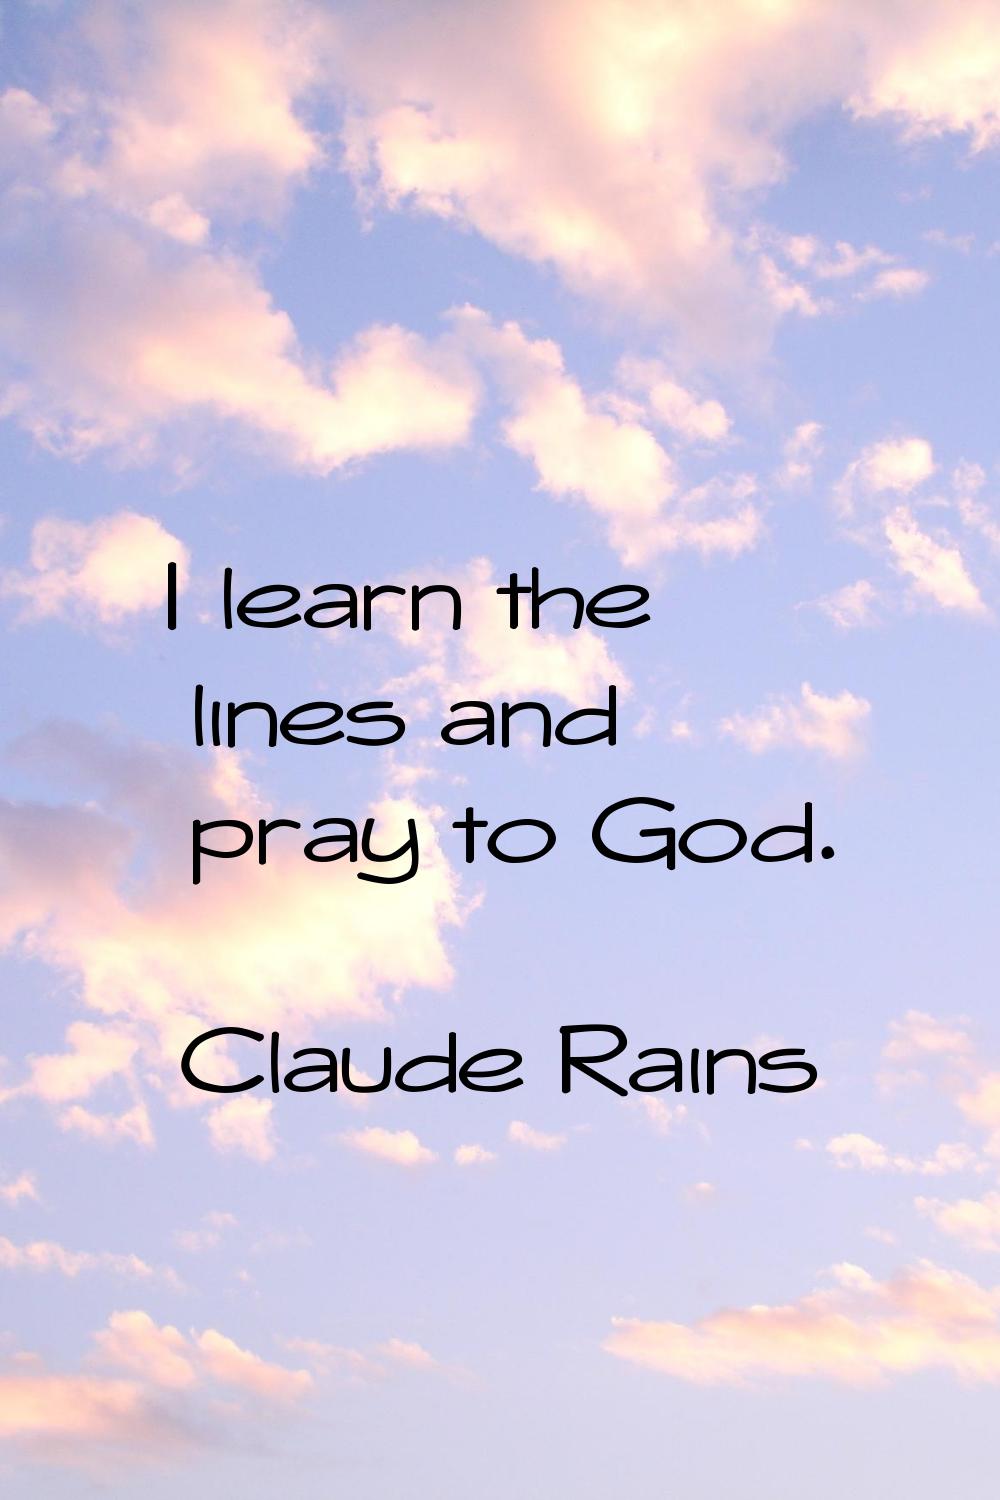 I learn the lines and pray to God.